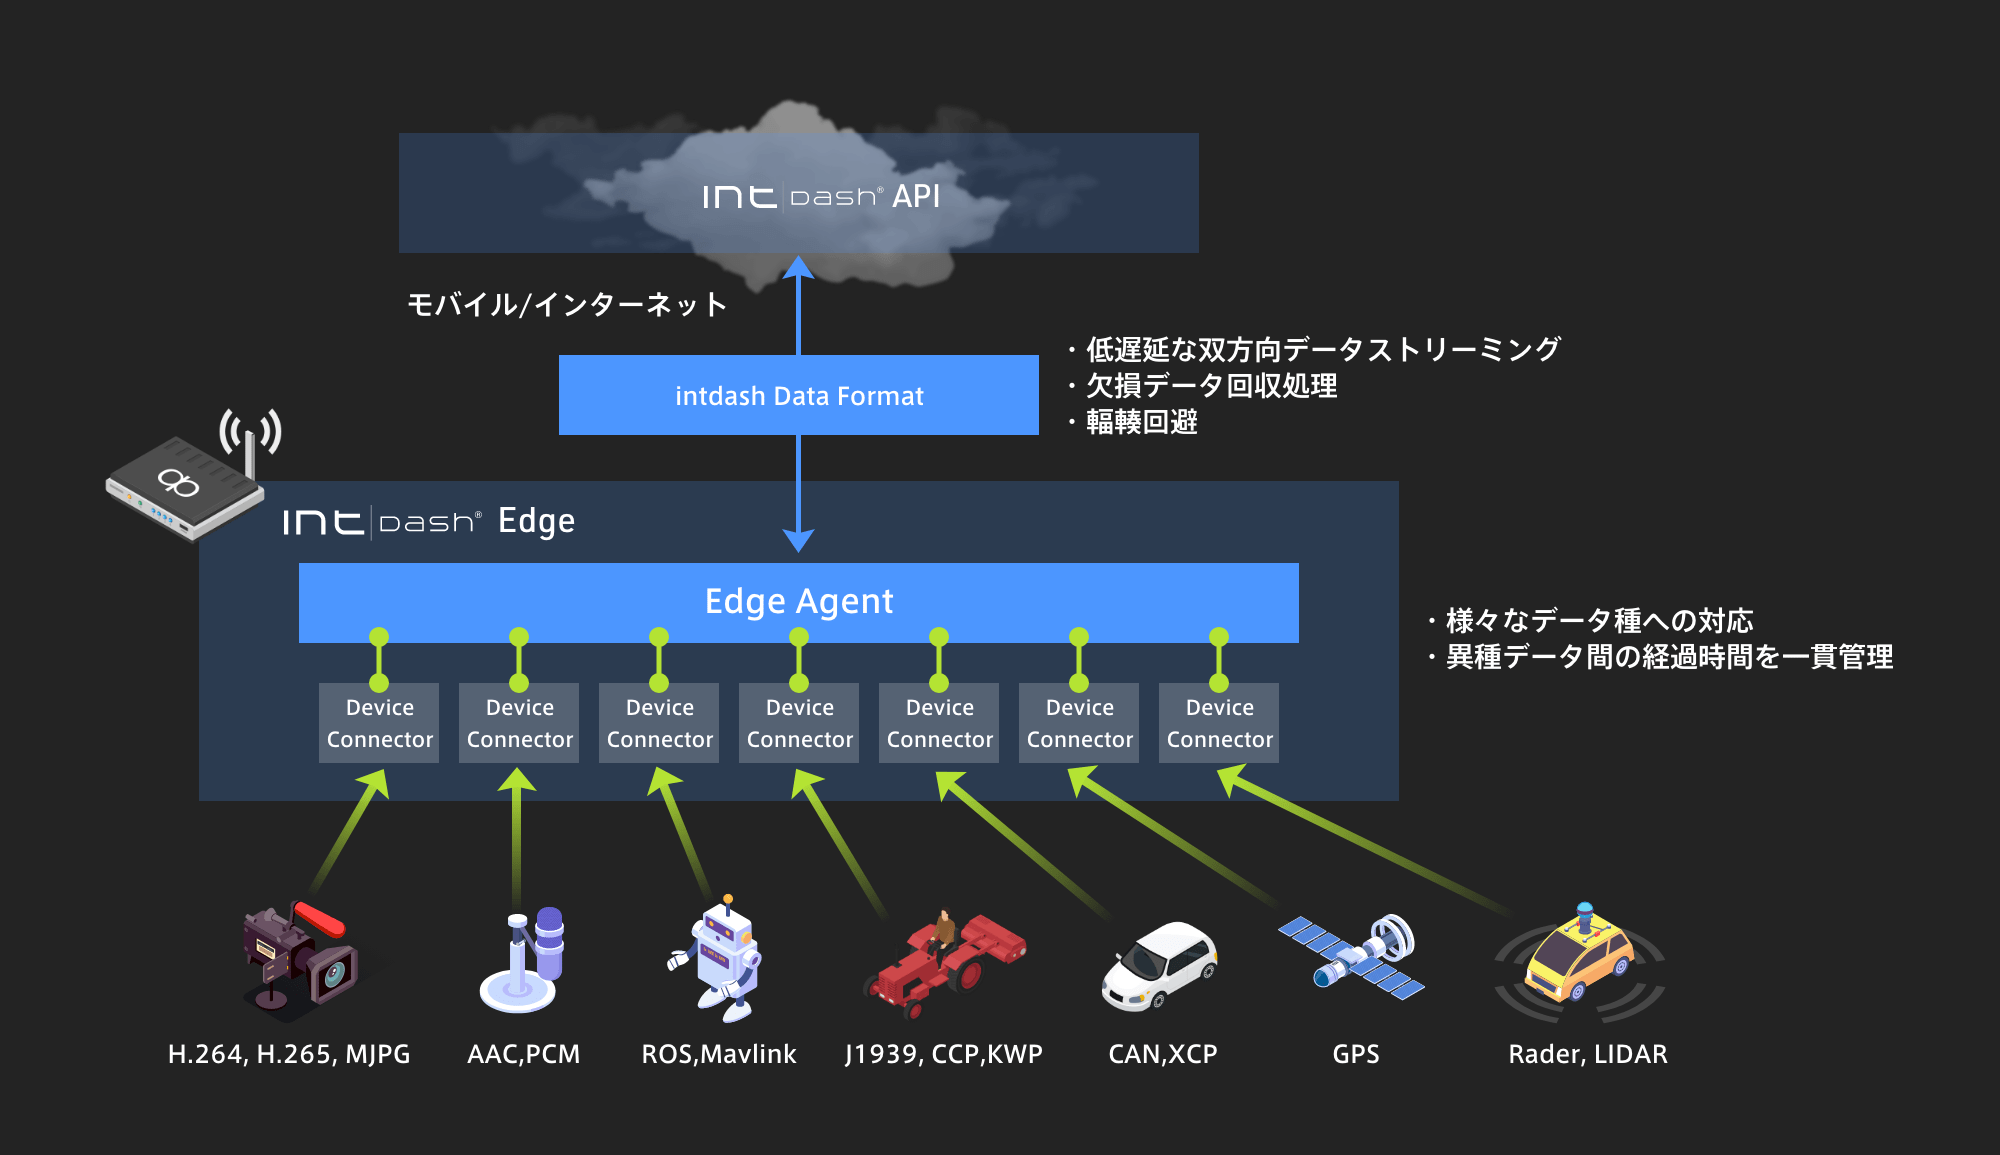 https://www.aptpod.co.jp/img/products/intdash/intdash-edge.png